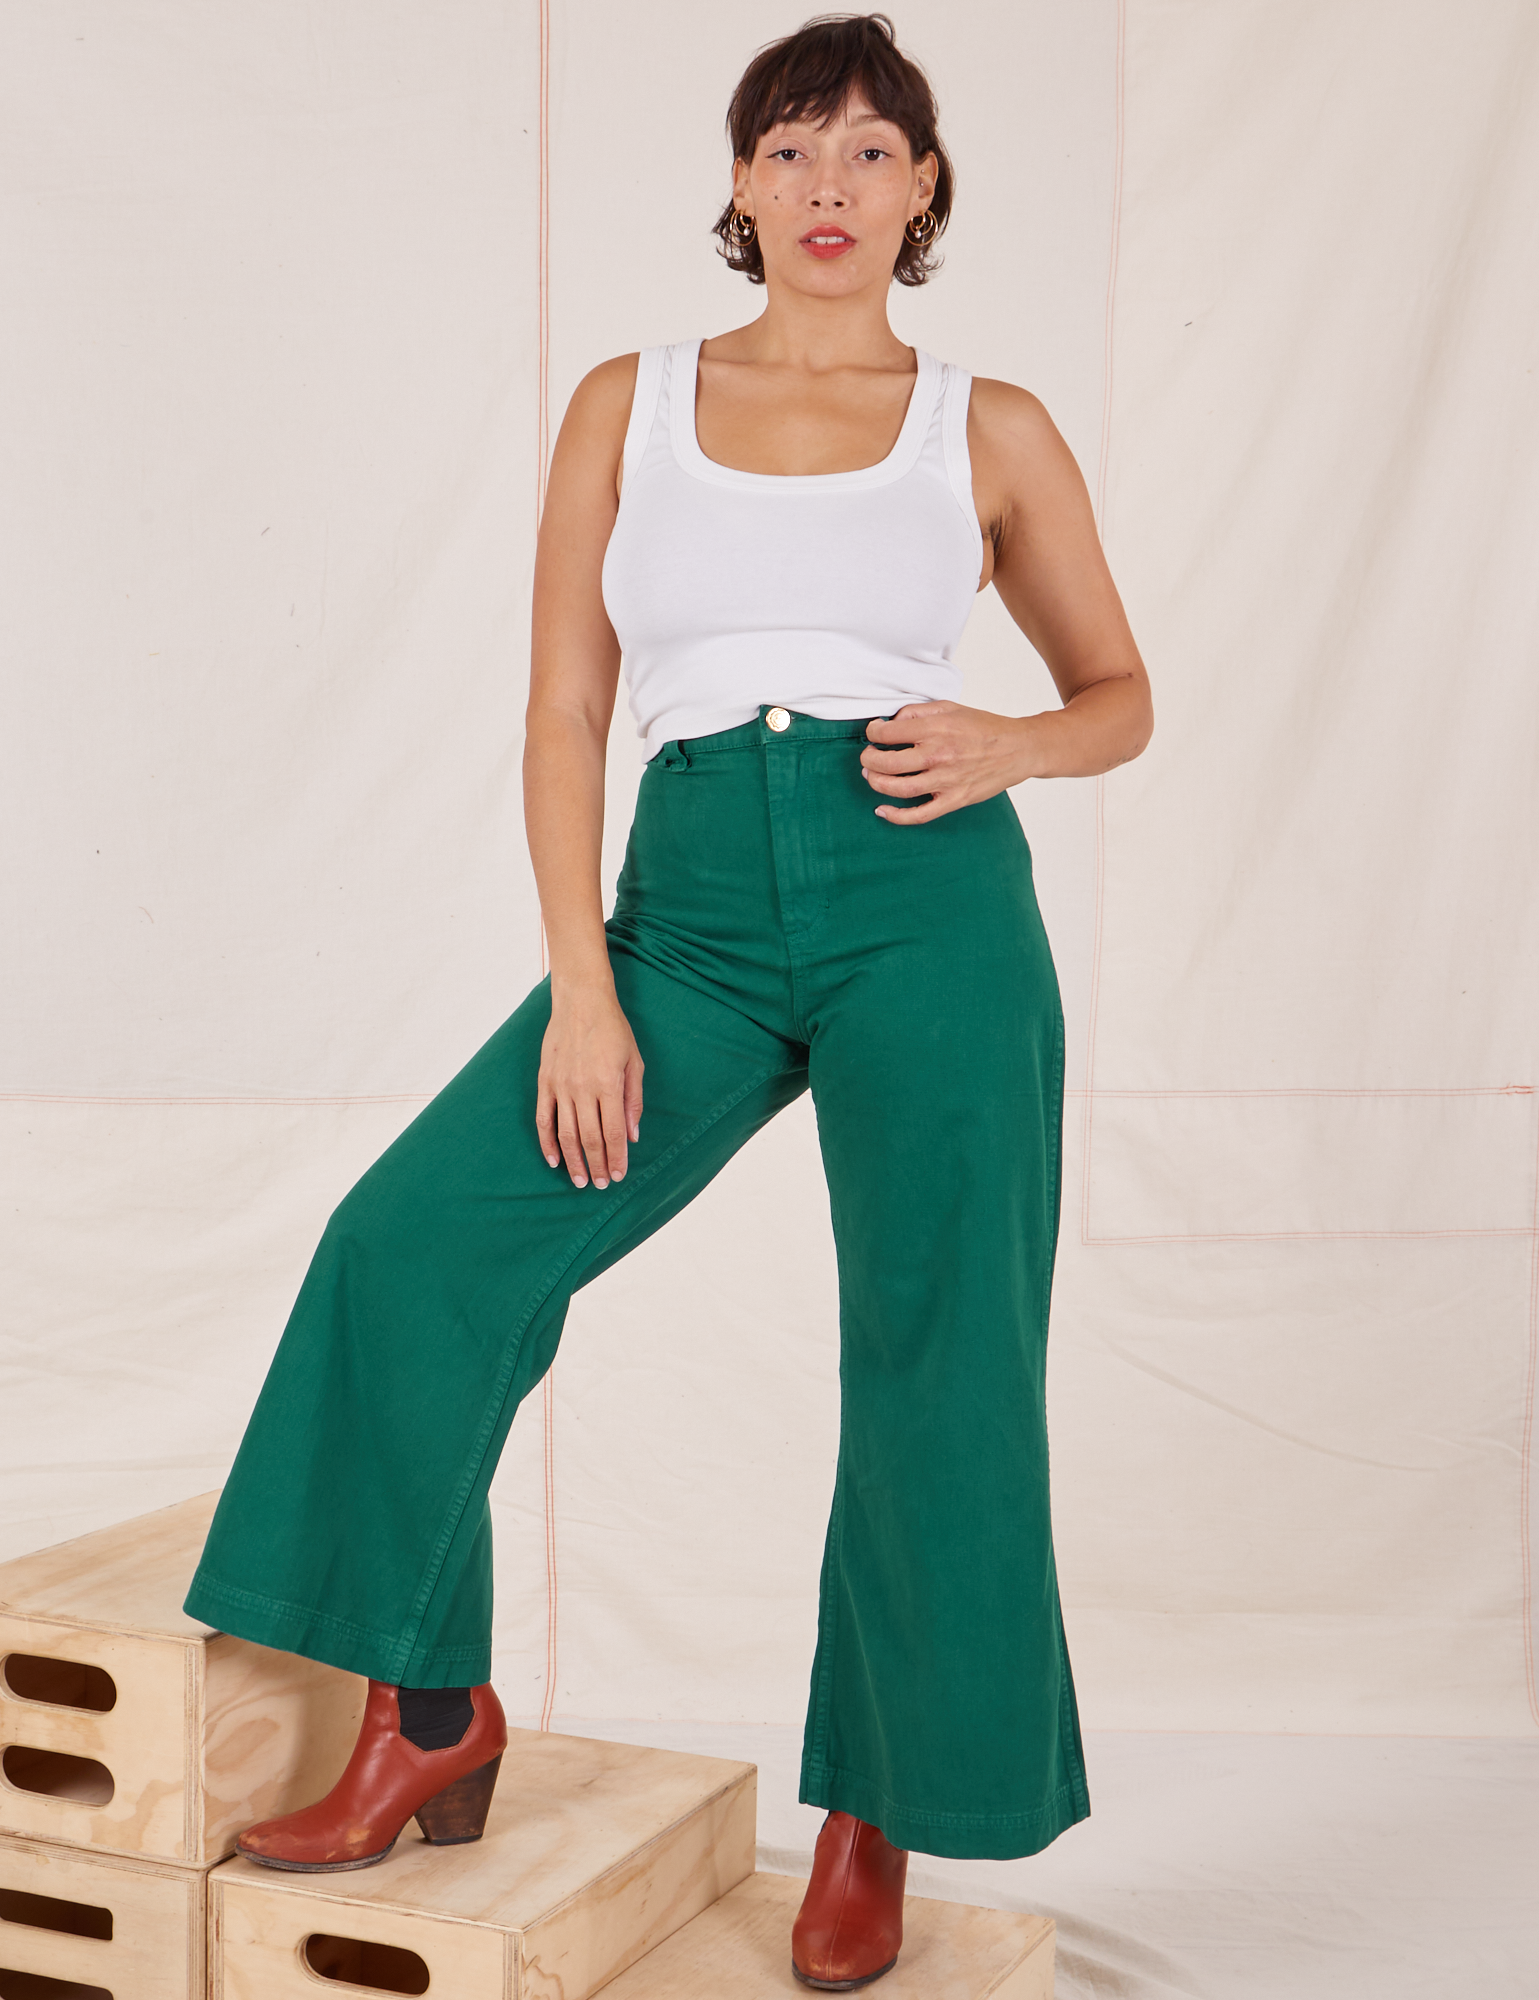 Tiara is 5&#39;4&quot; and wearing XS Bell Bottoms in Hunter Green paired with vintage off-white Cropped Tank Top